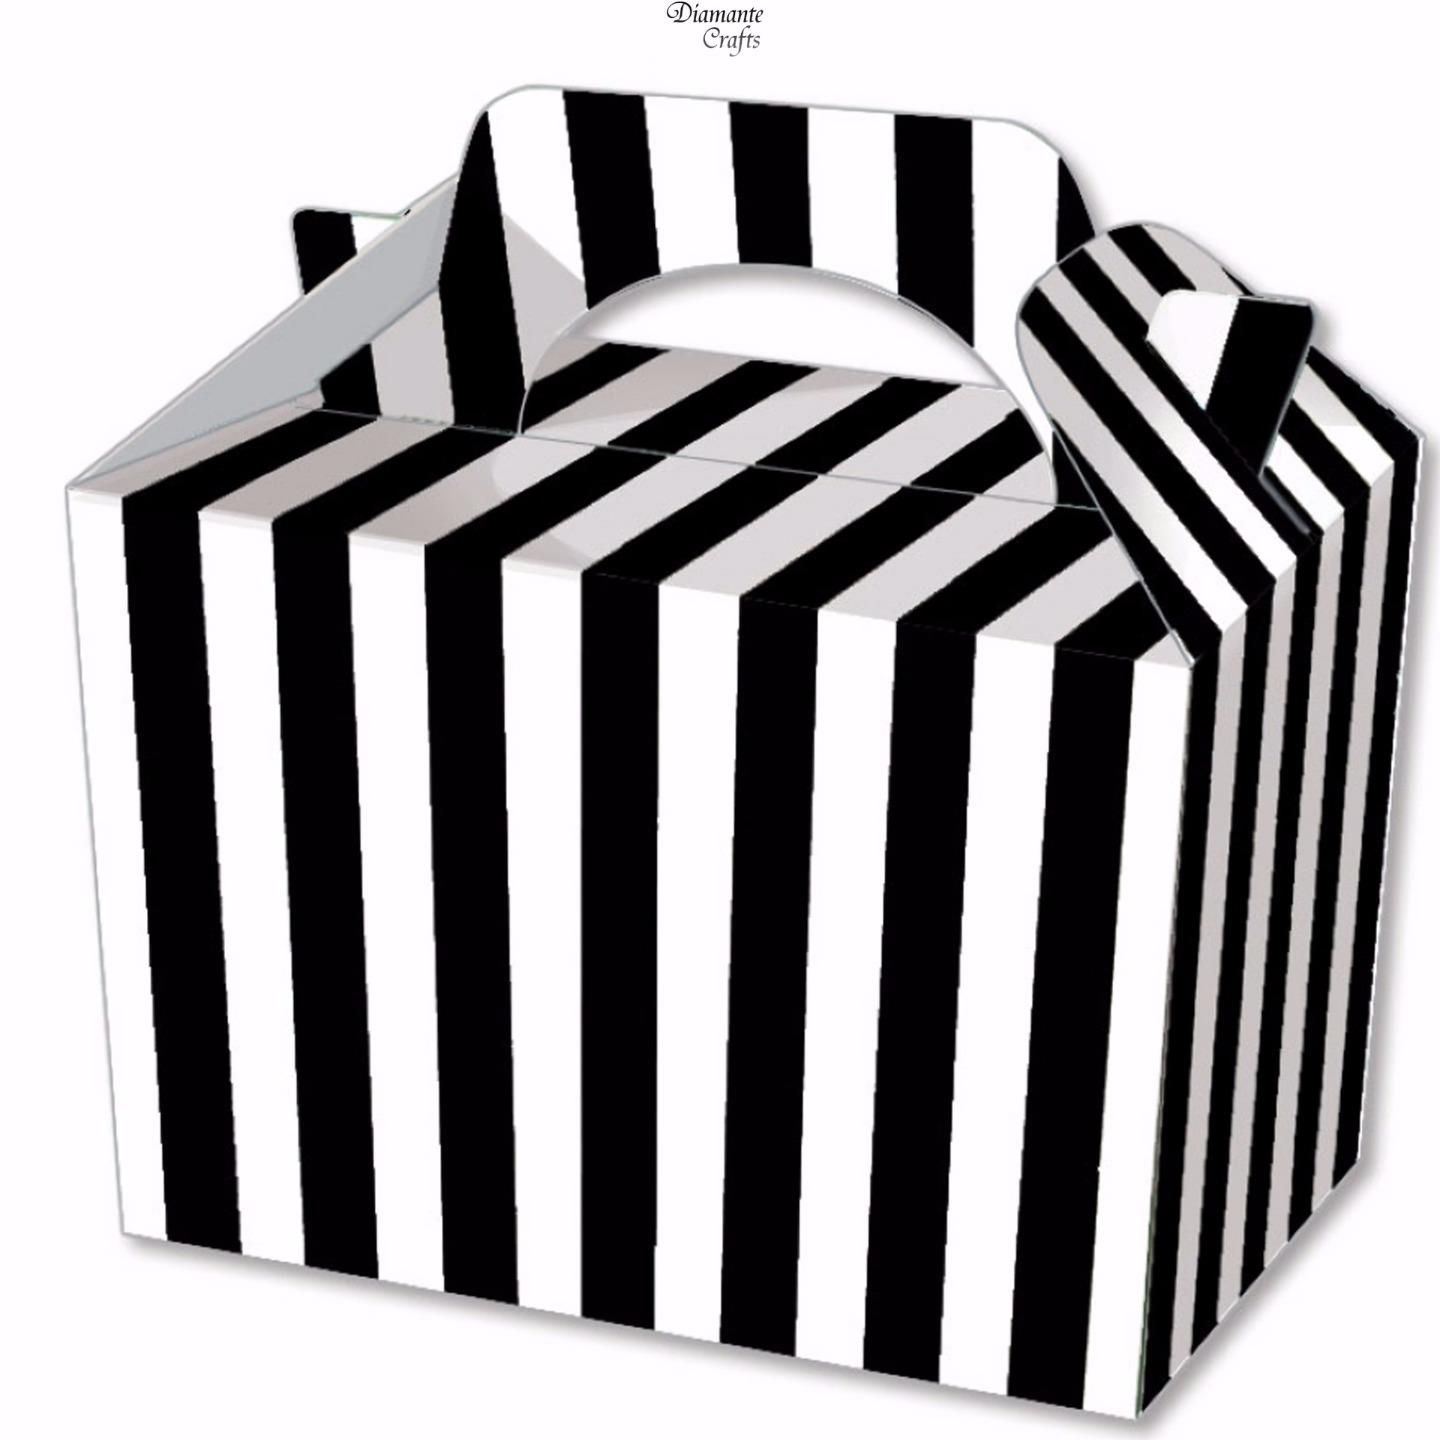 10 Party Boxes - Stripe - Cardboard Lunch Food Loot Spot Treat Box ...